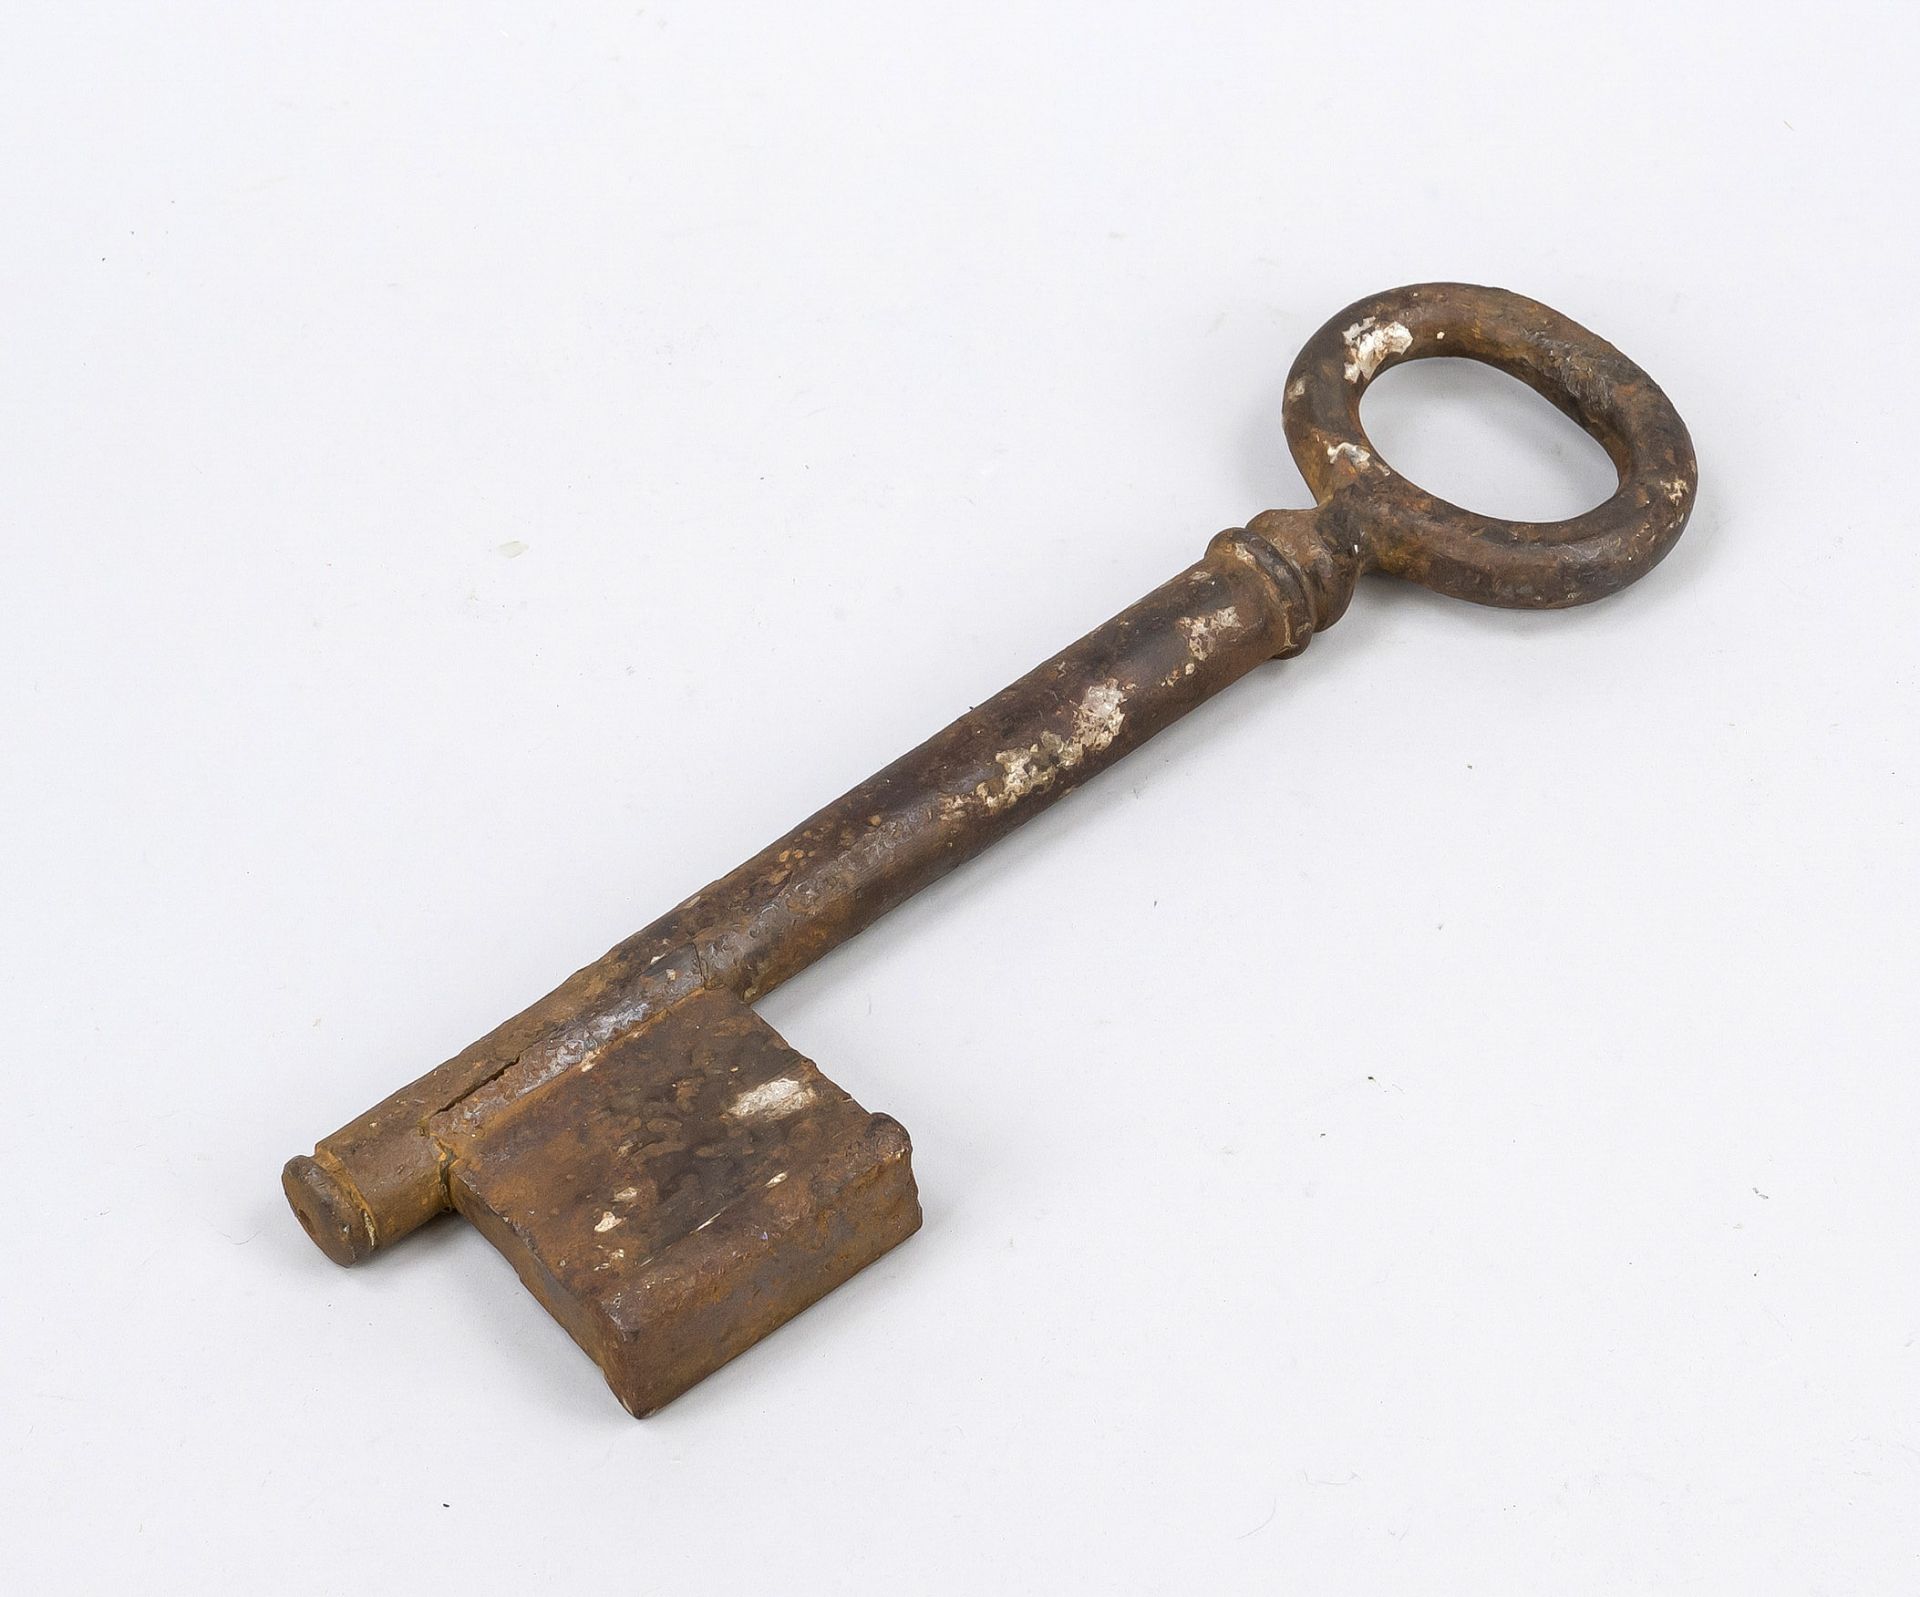 Oversized iron key, 19th century or older, iron. Very massive, heavy design. Beard without recesses,